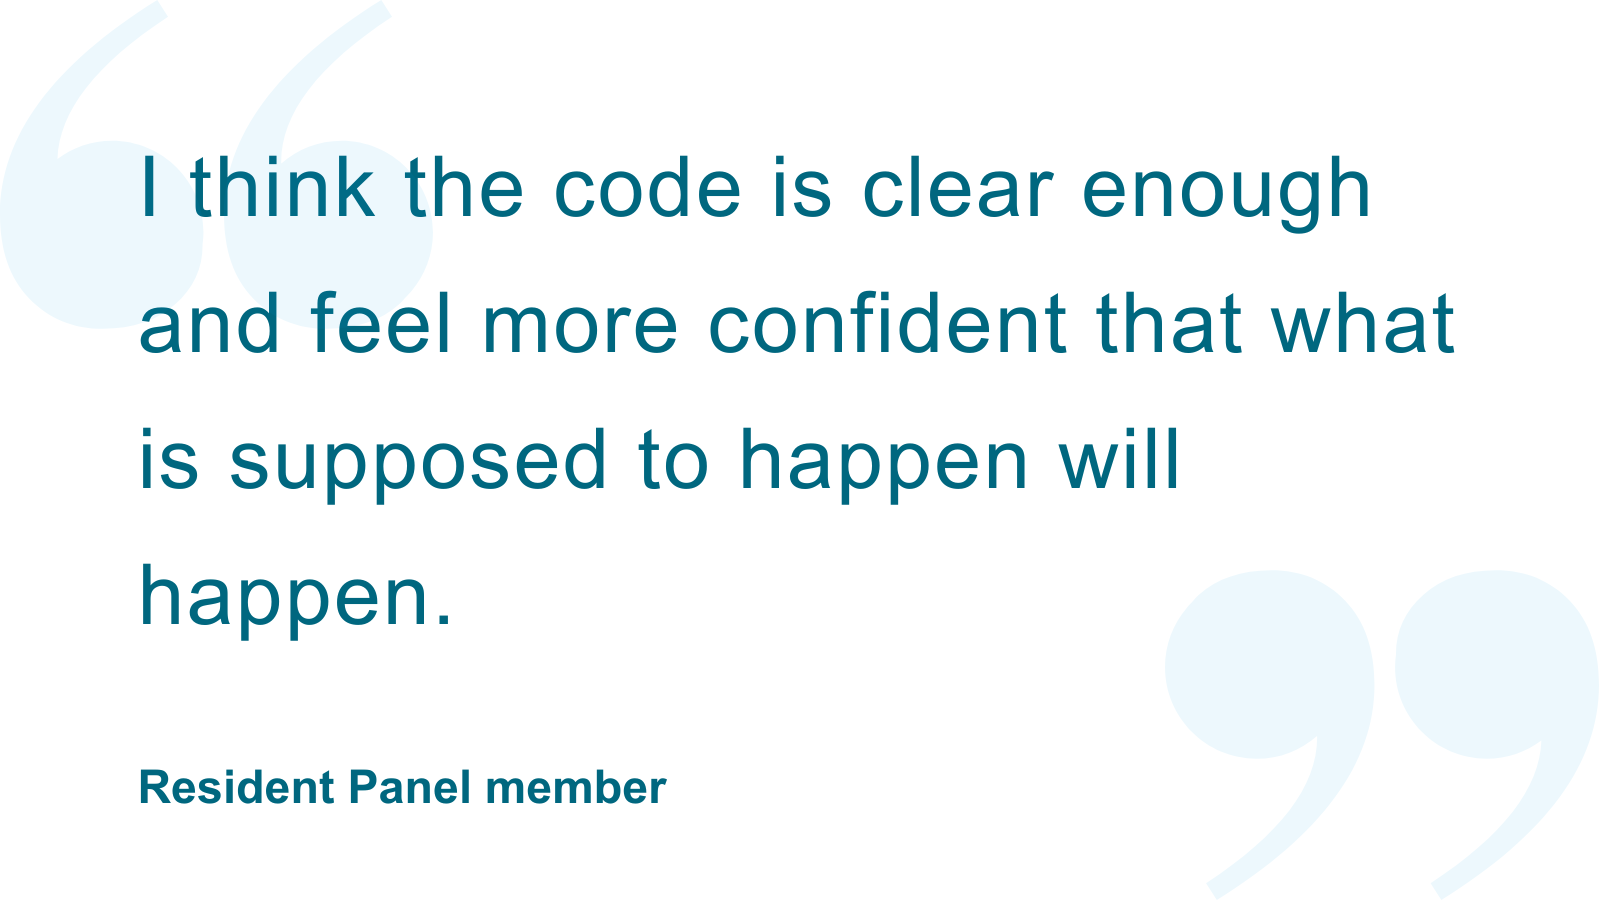 ‘I think the code is clear enough and feel more confident that what is supposed to happen will happen.’